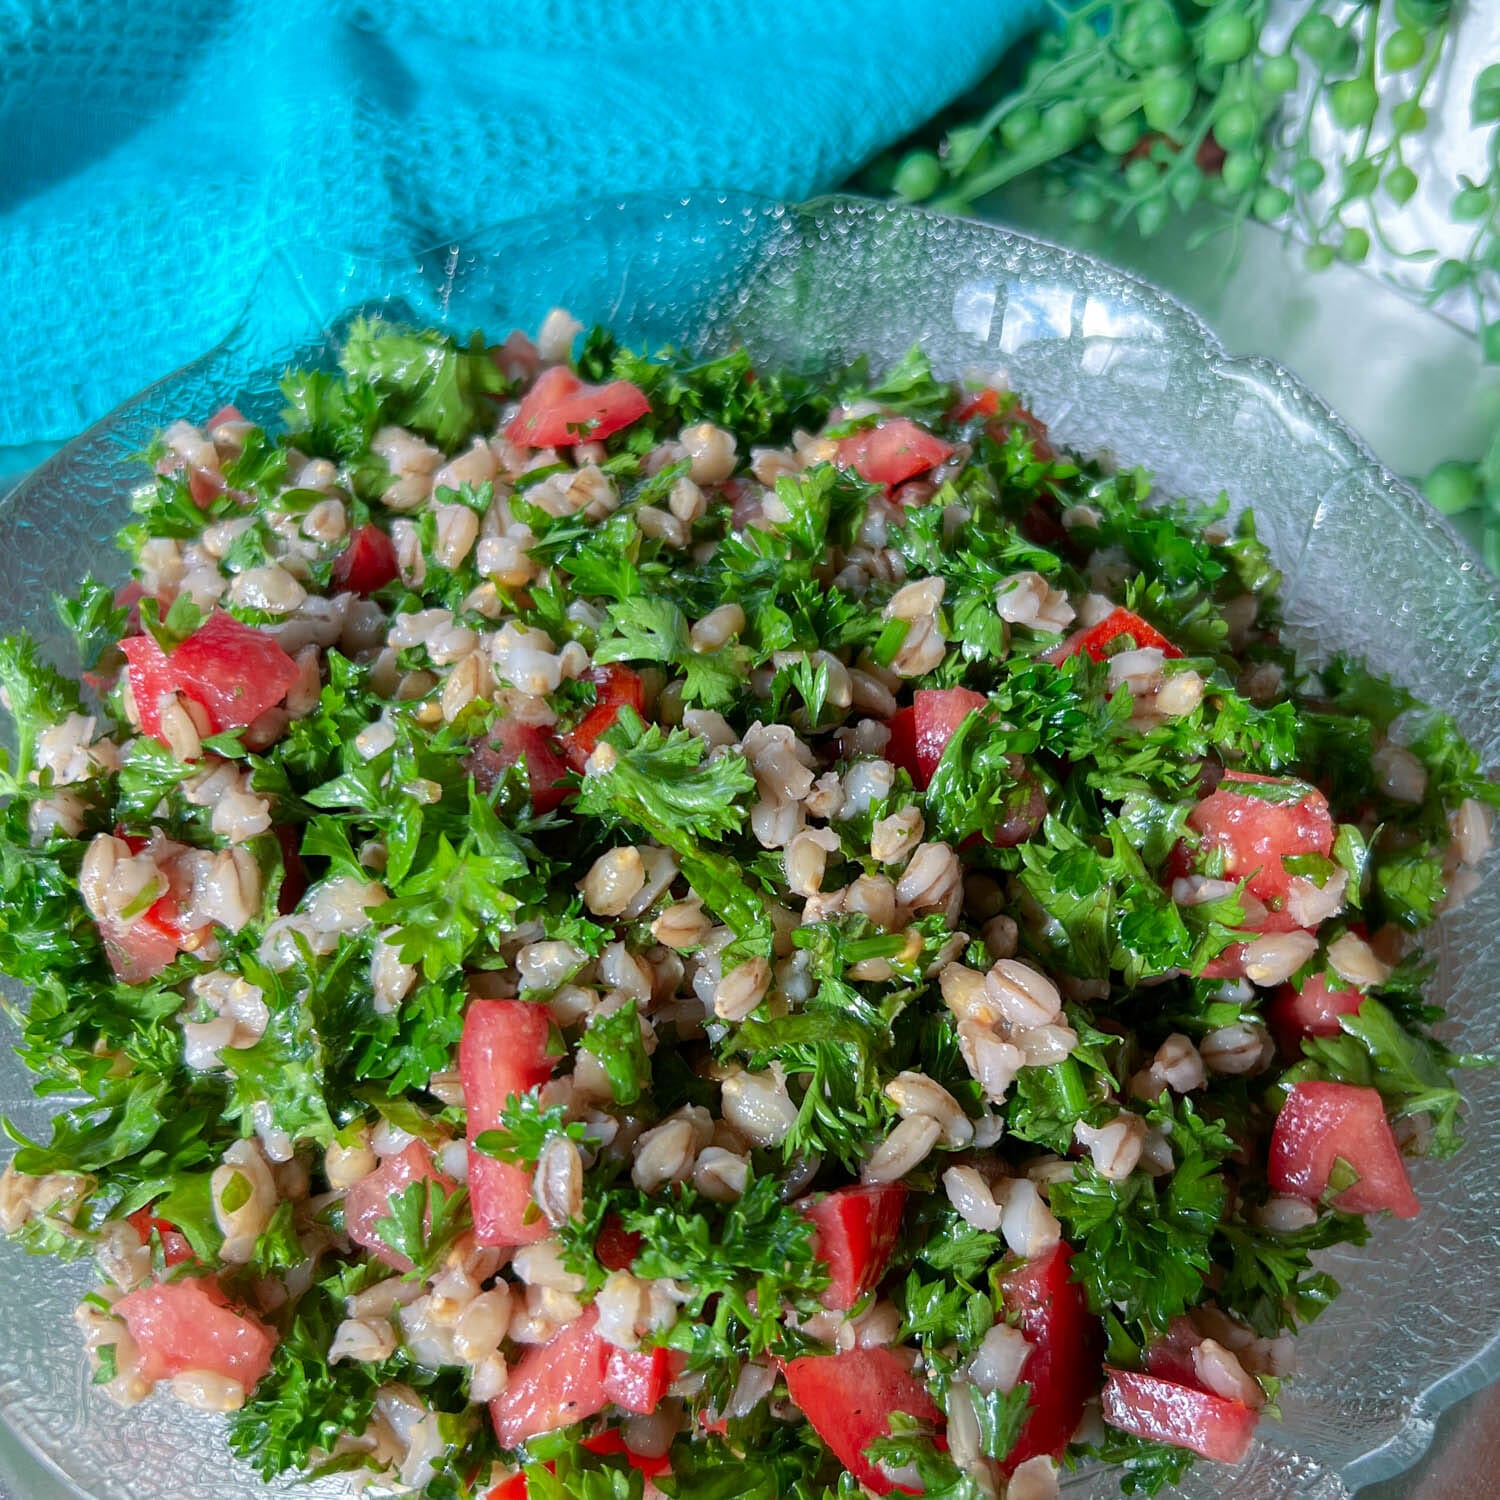 Tabbouleh – Parsley and Whole Grain Salad